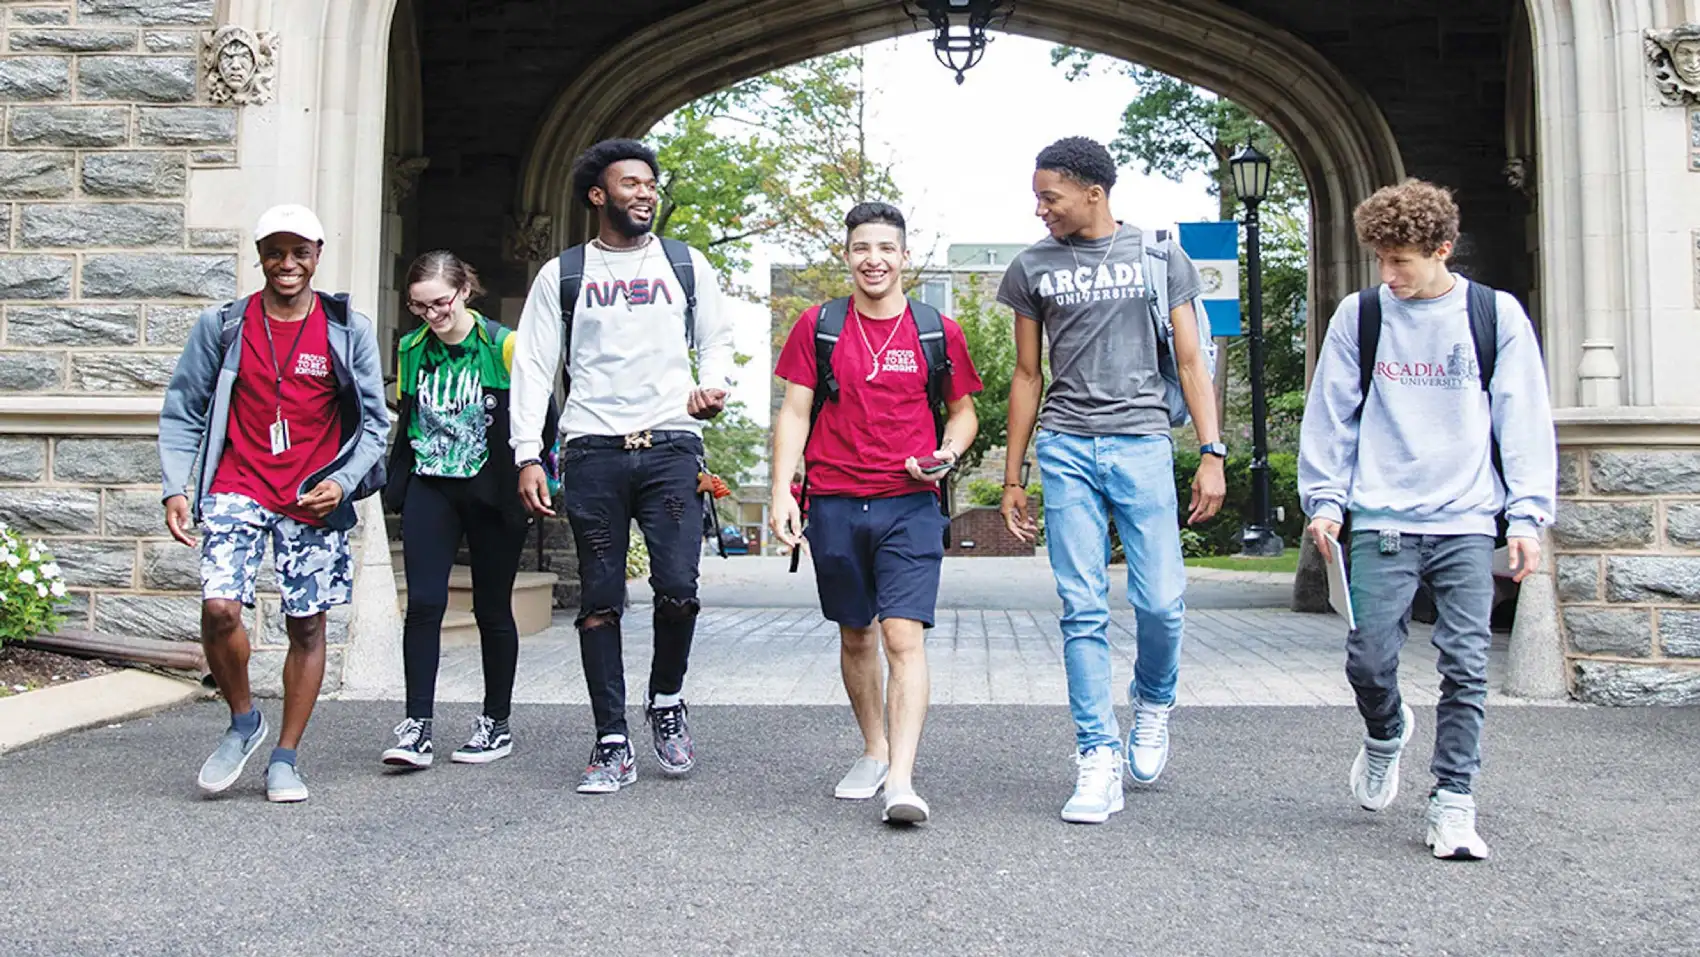 Six students walk through an old stone archway at Arcadia University.